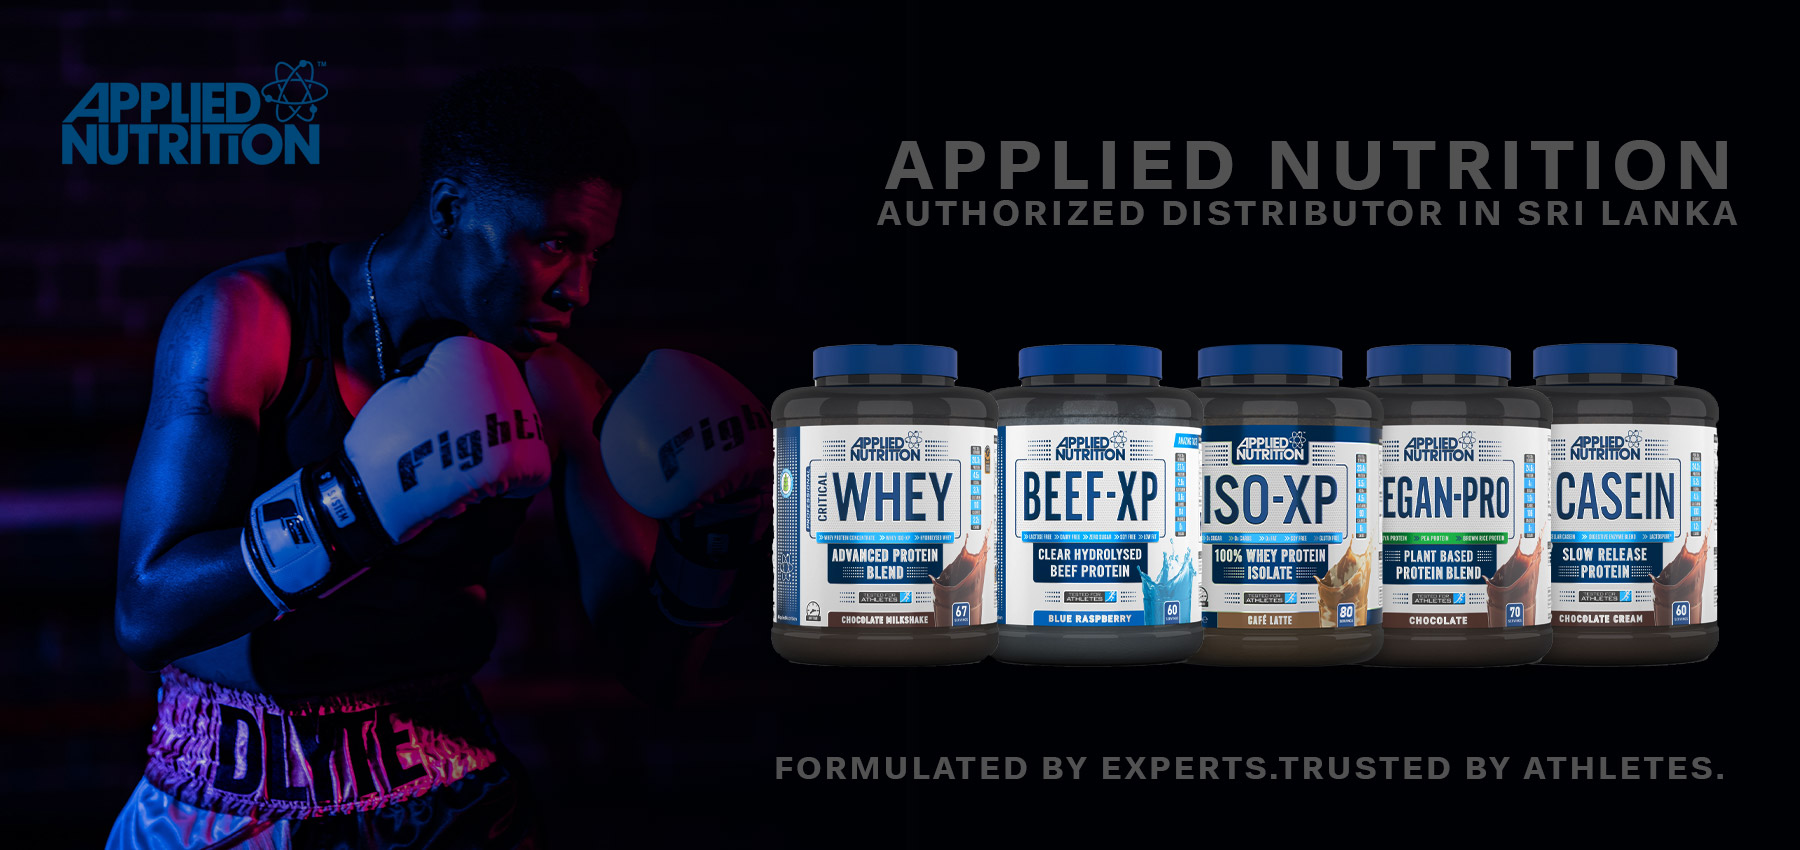 SC Supplements Store is the authorized distributor for applied nutrition in sri lanka